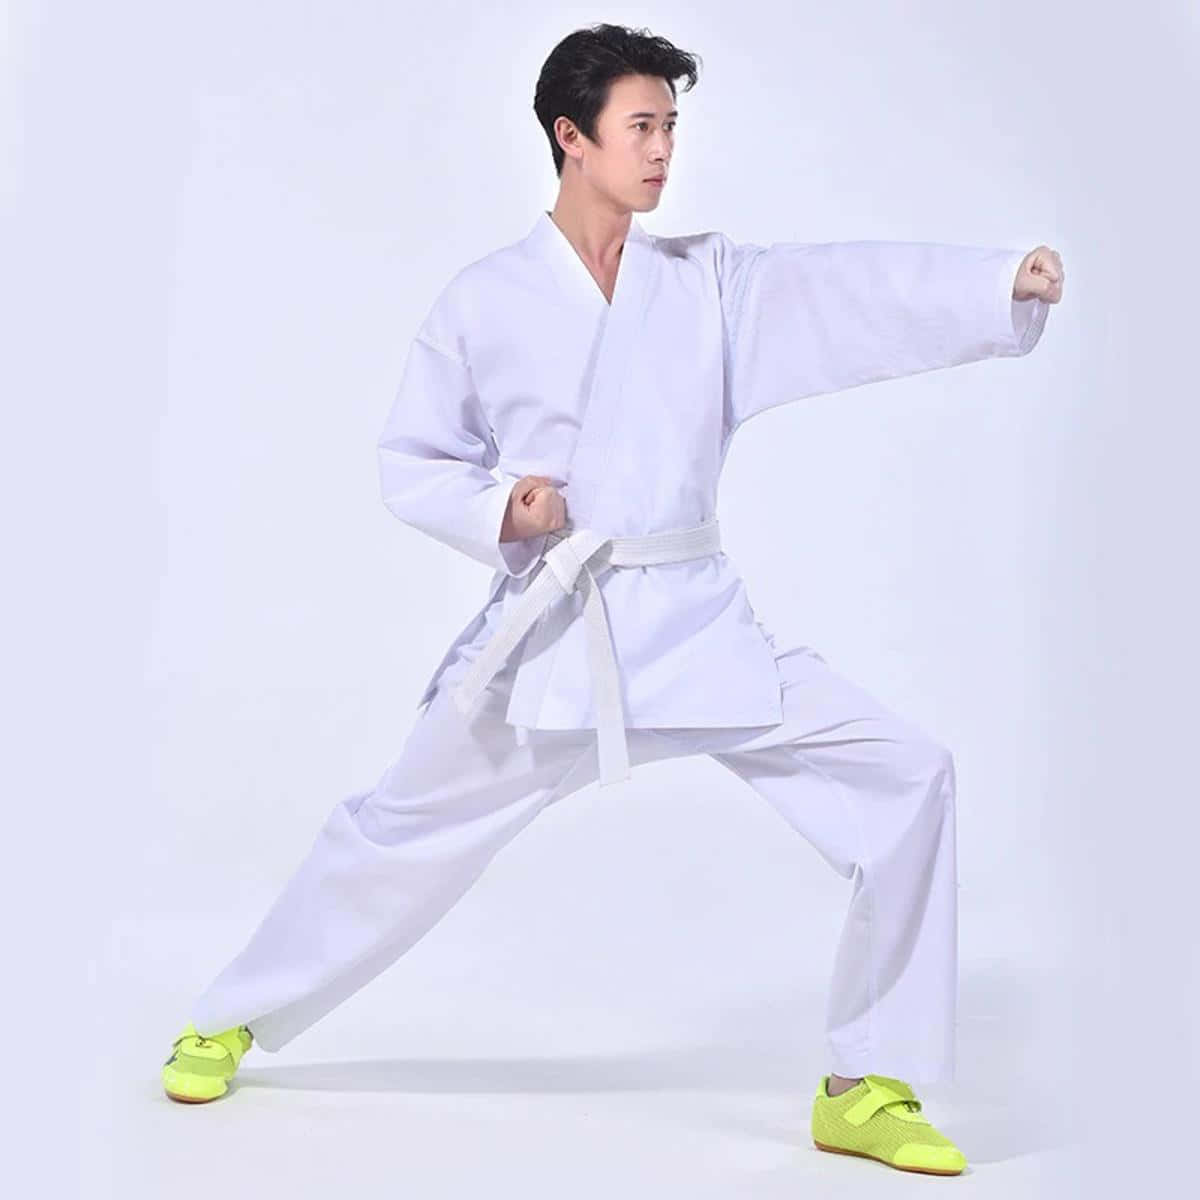 A Taekwondo uniform for training and competition. Wallpaper